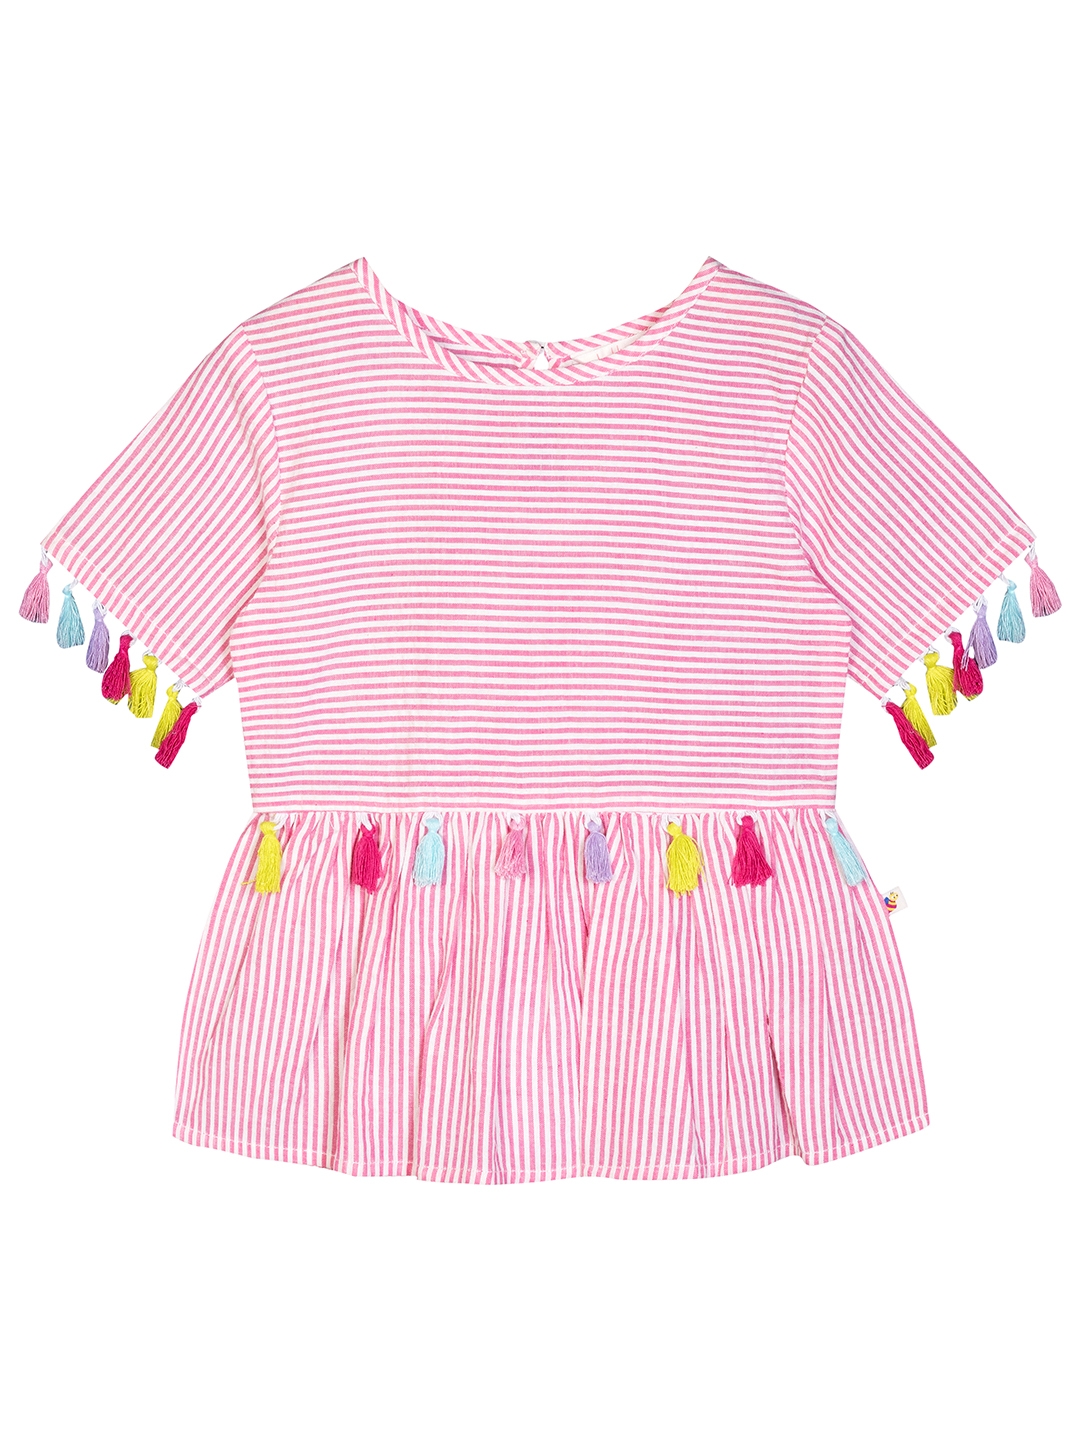 Budding Bees | Budding Bees Girls Pink Tassels Lace Top